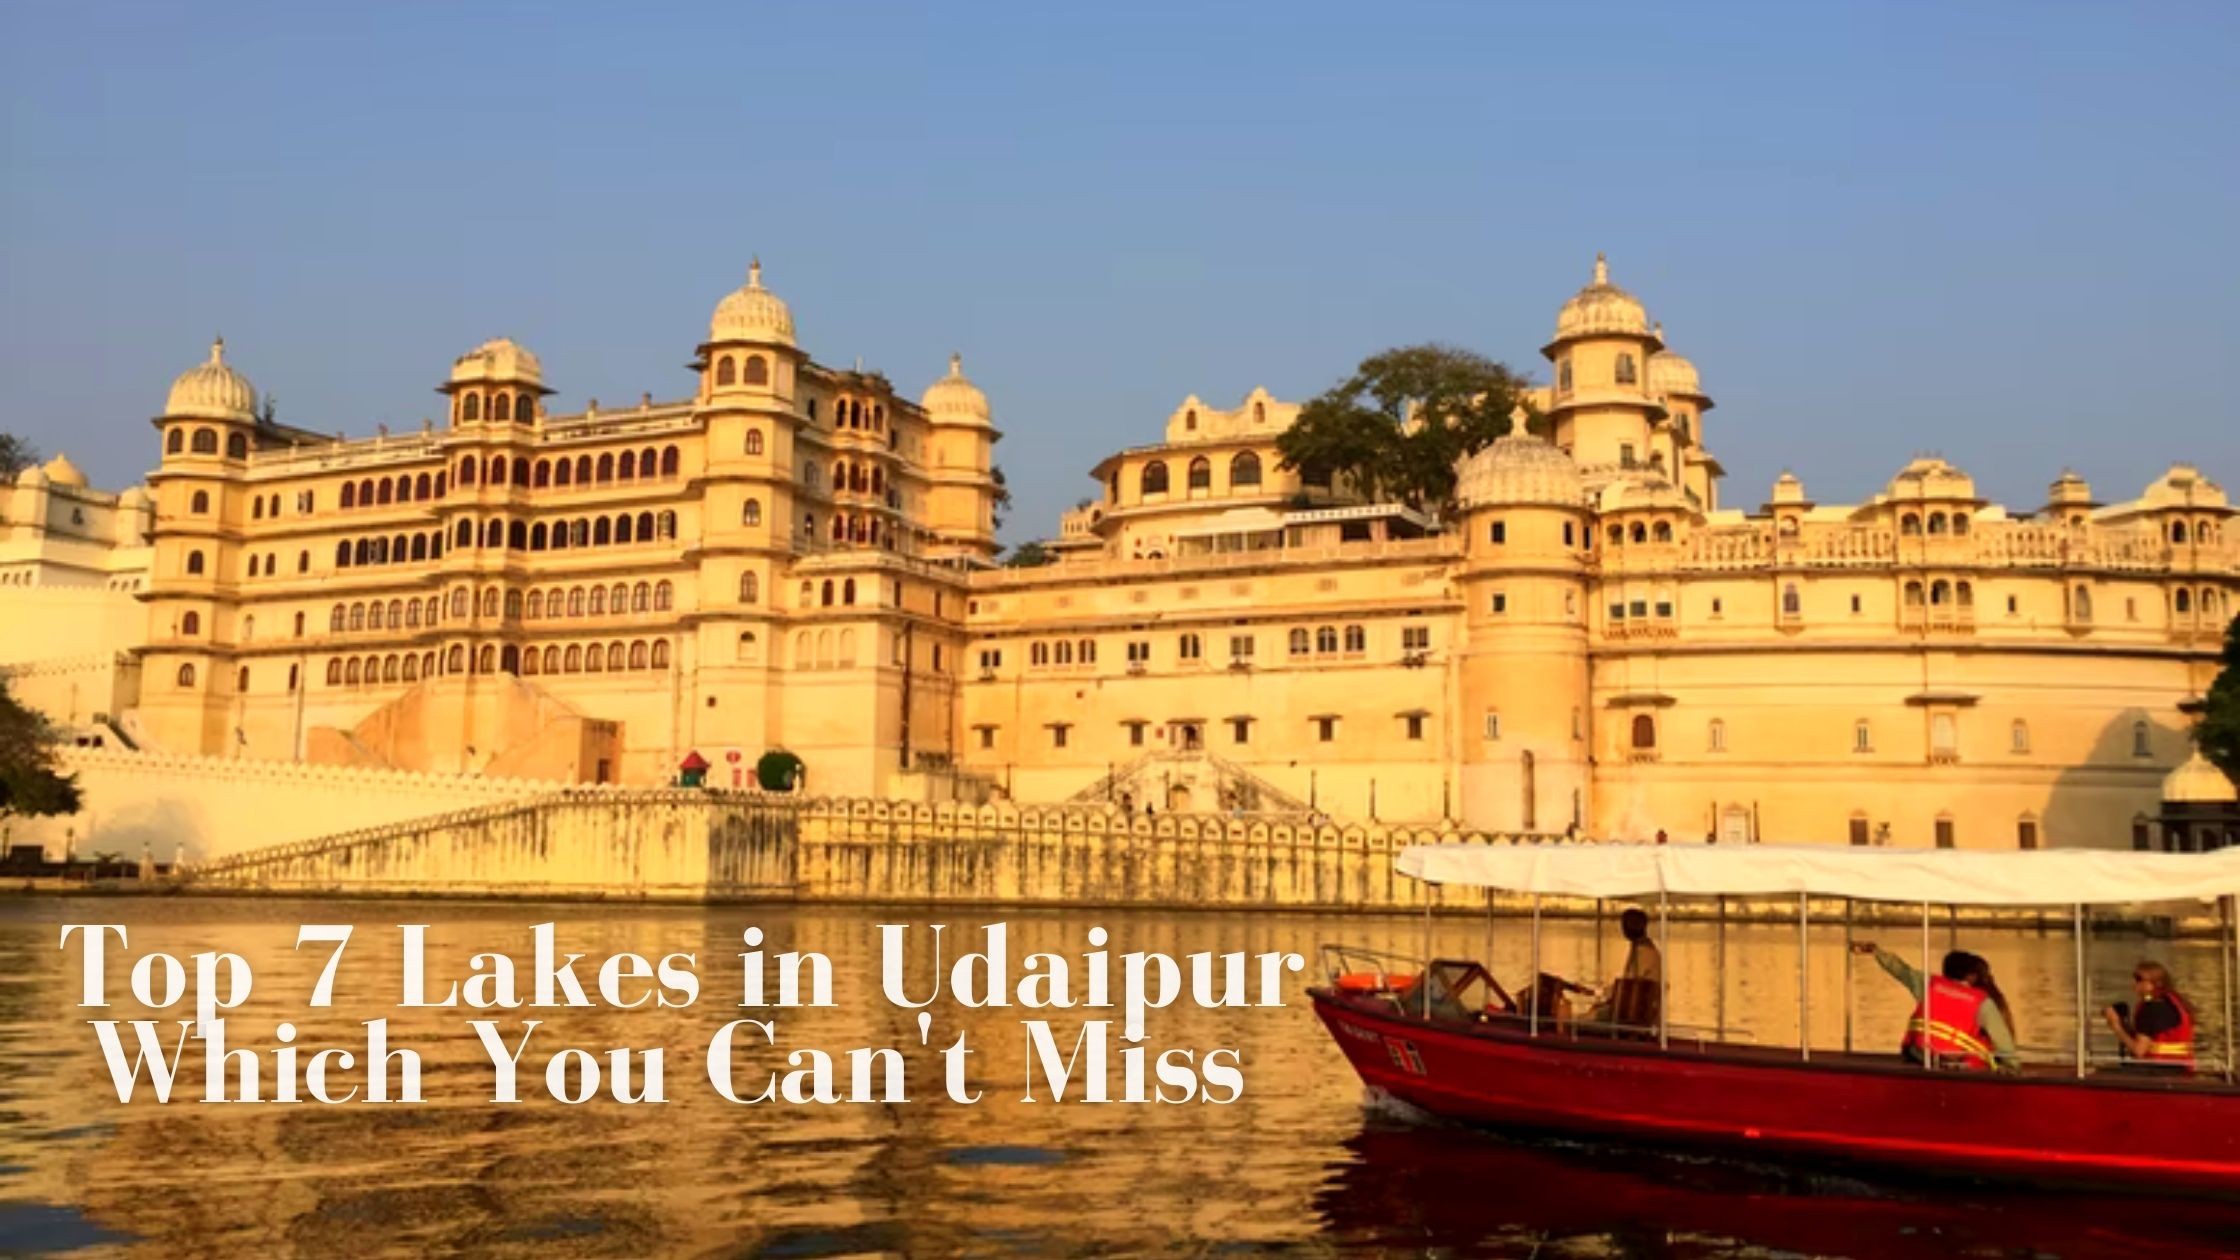 _Top 7 Lakes in Udaipur Which You Can't Miss